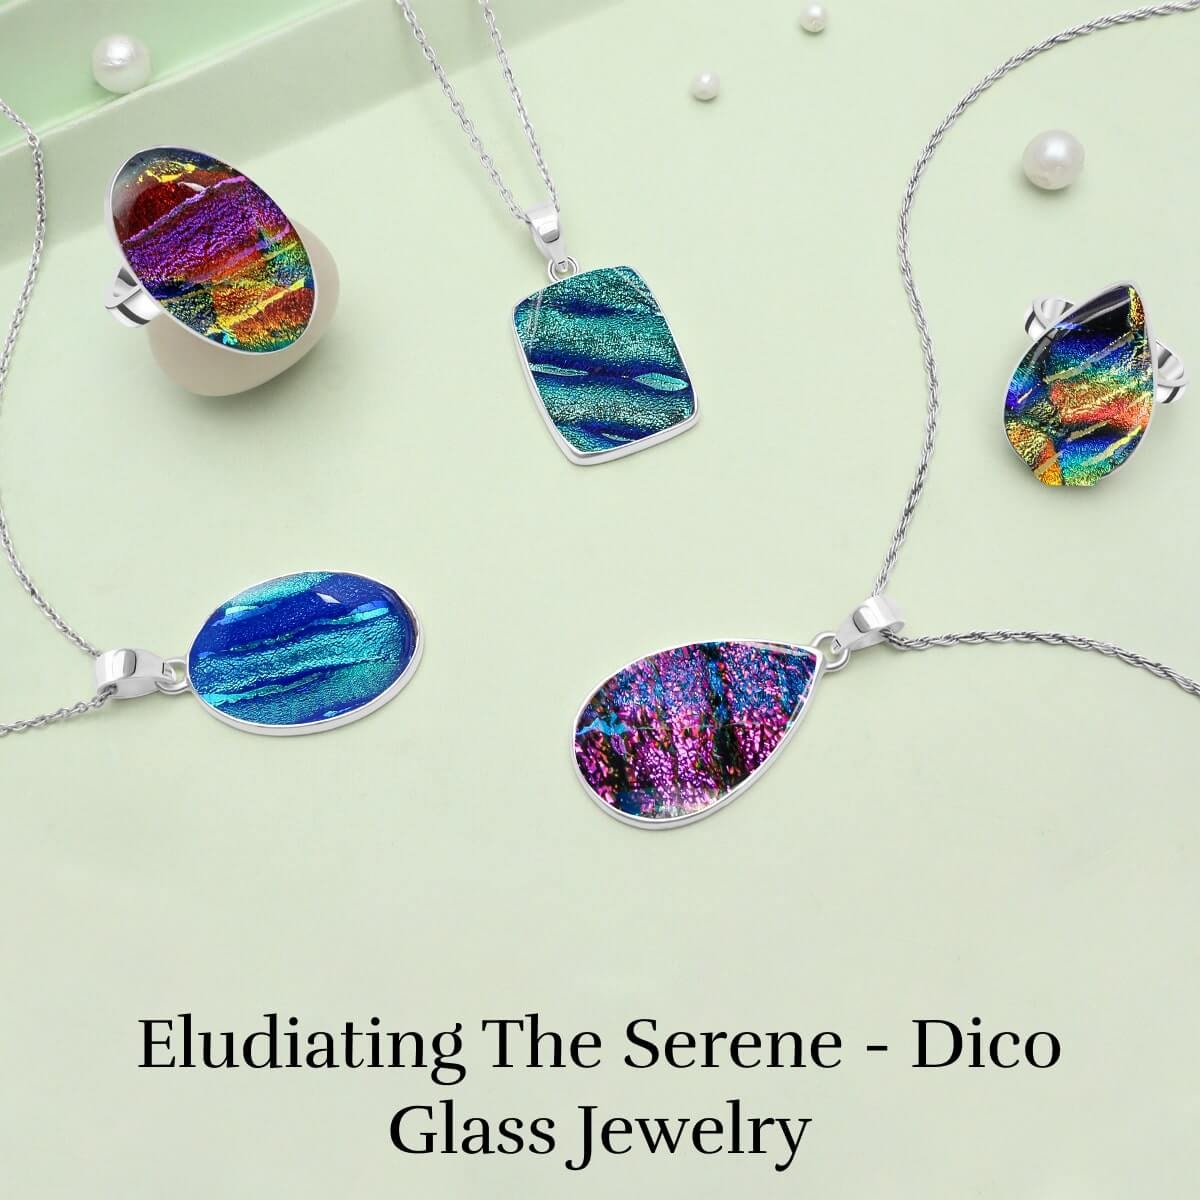 An Enticing Wonder: Dico Glass Jewelry